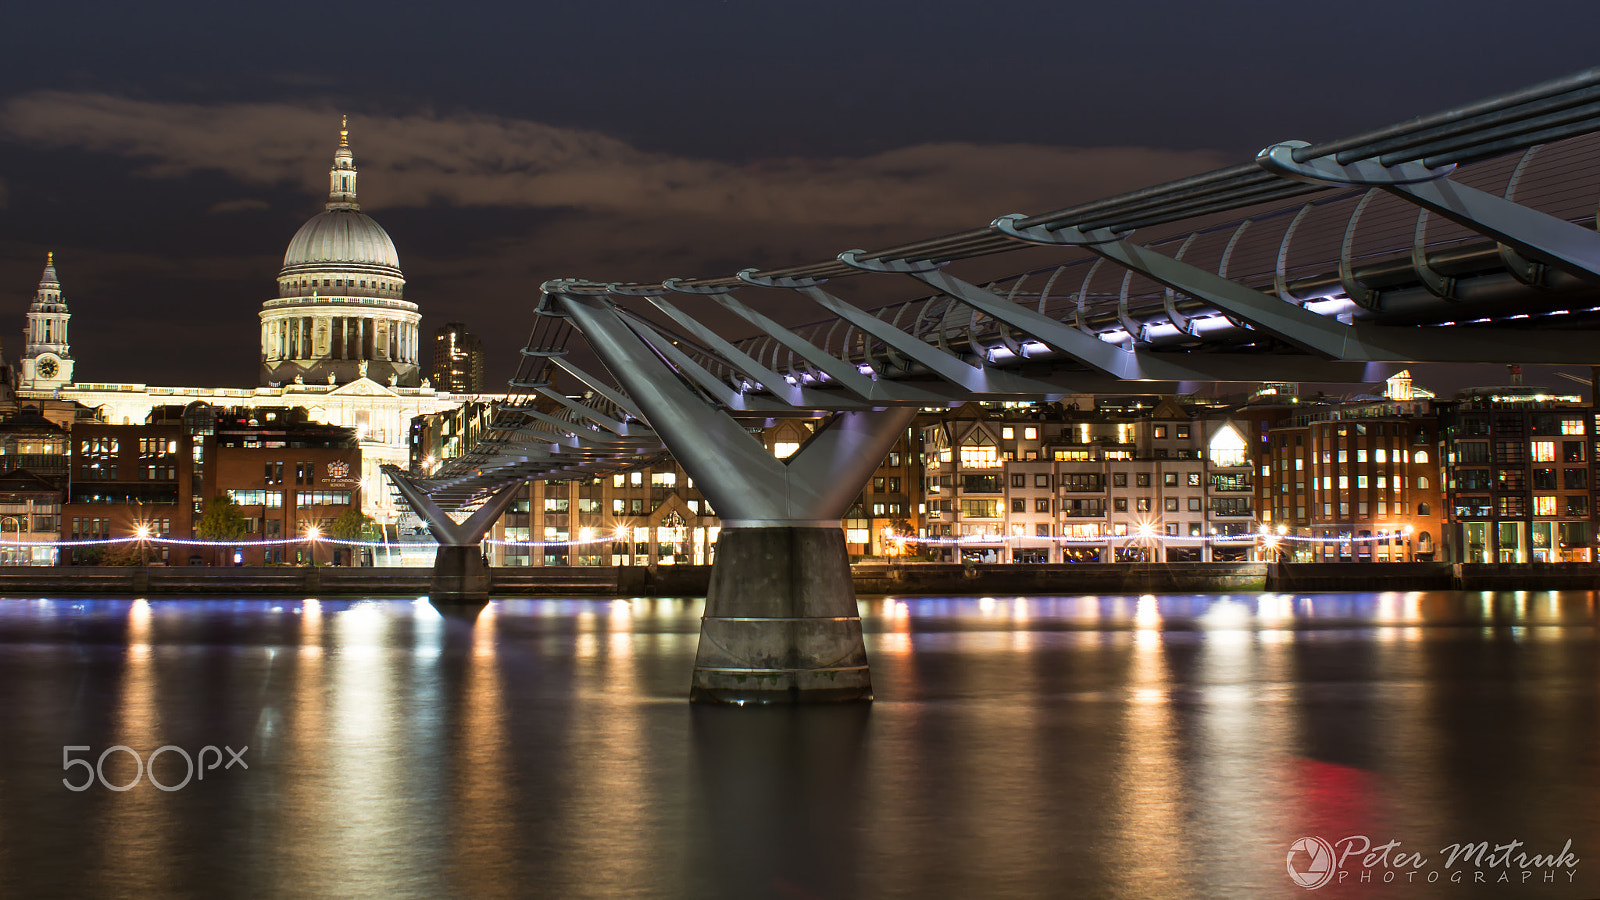 Nikon D7100 sample photo. St paul's cathedral photography